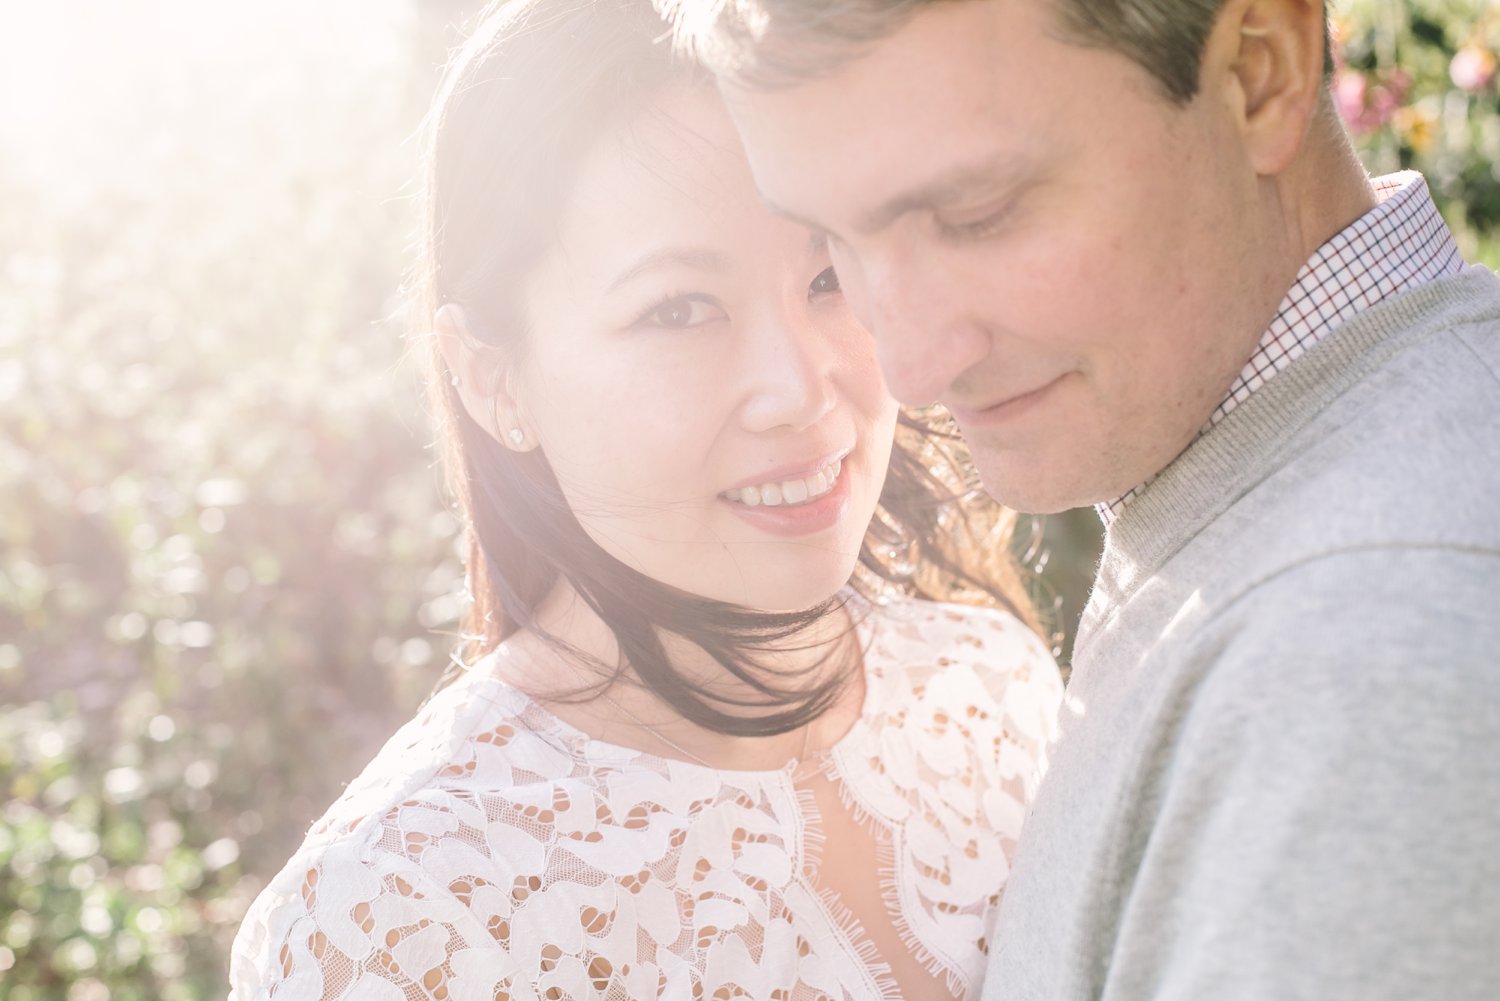 38NYC-NJ-ENGAGEMENT-PHOTOGRAPHY-BY-INTOTHESTORY-MOO-JAE.JPG